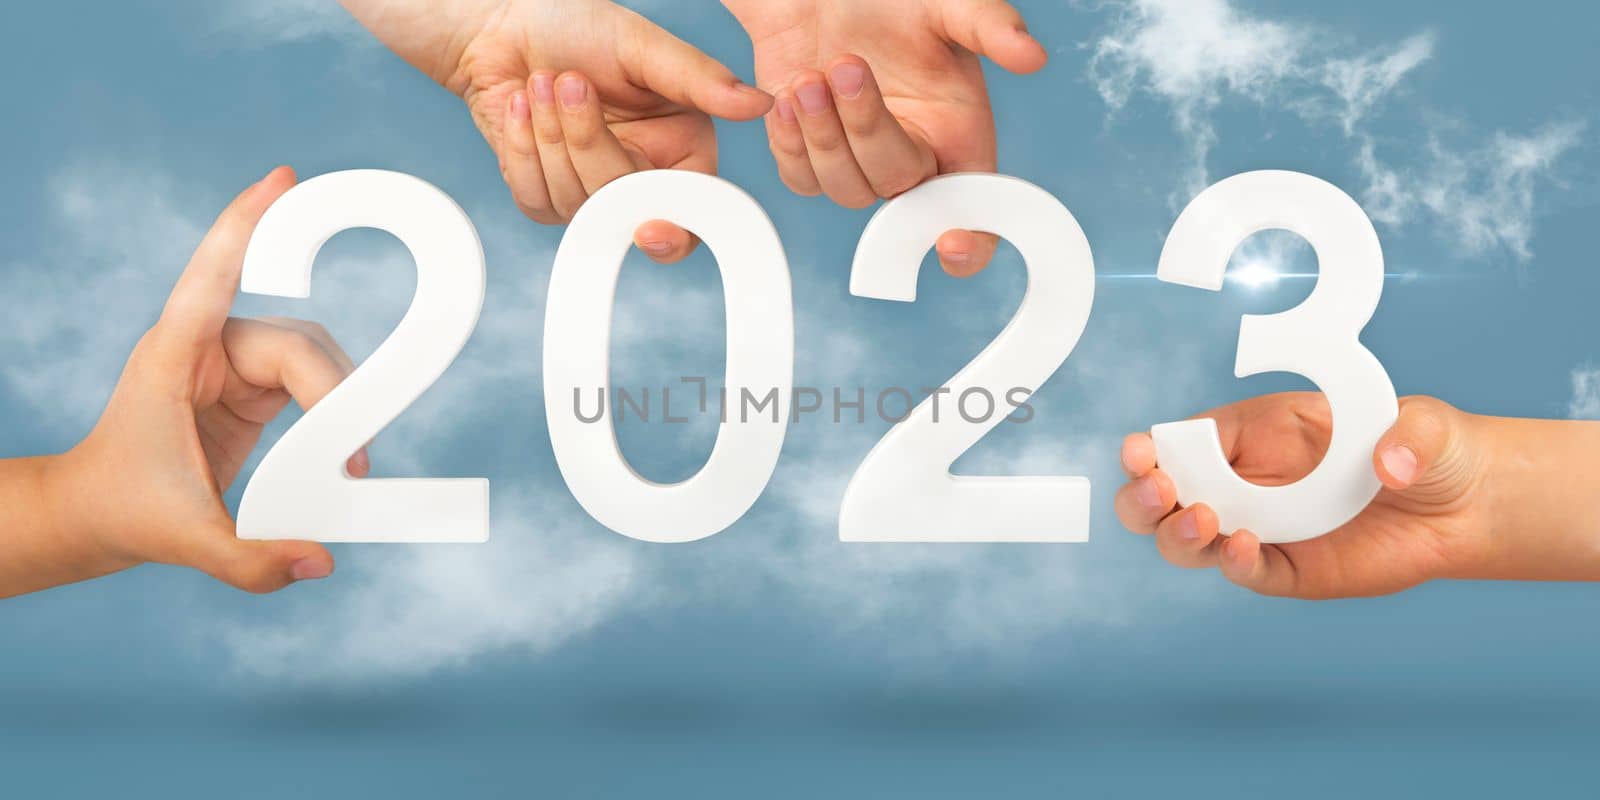 numbers in hands 2 0 2 3. Hands holding numbers folding into the year 2023 kas symbol of the new year. Calendar design or website banner by SERSOL